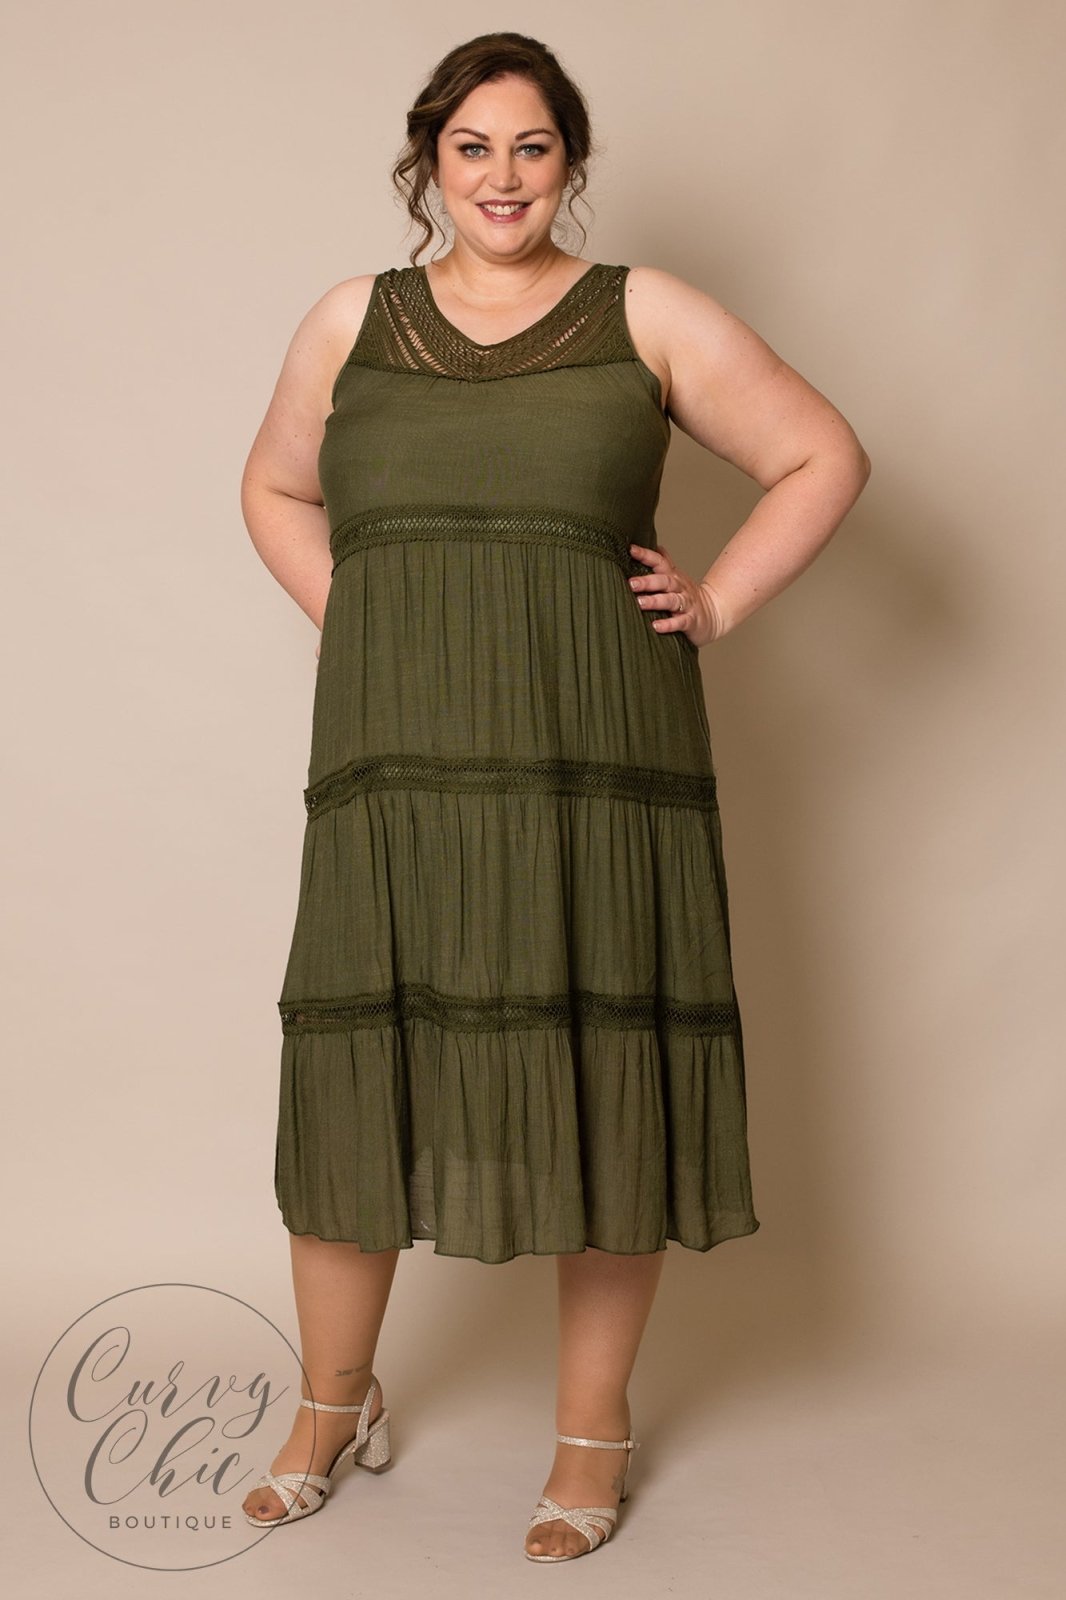 Green Cotton Style Plus Style Maxi Dress - Curvy Chic Boutique